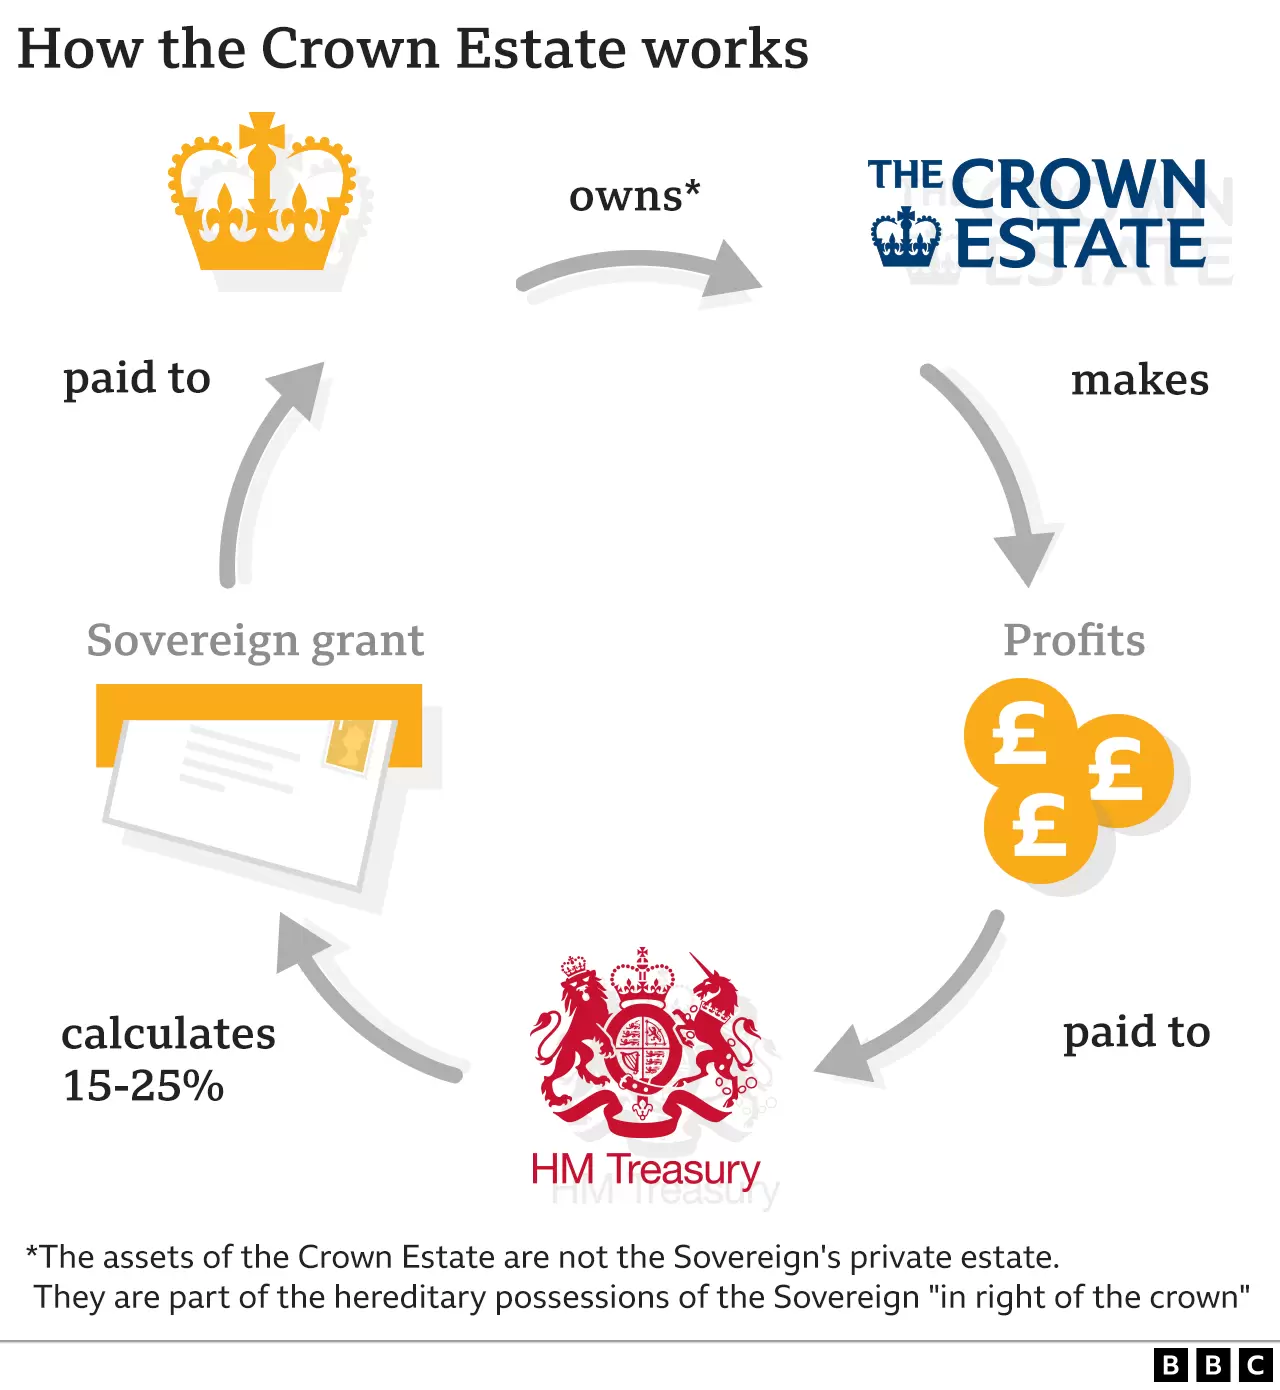 How the Crown Estate Works. Photo Credit: © BBC. 